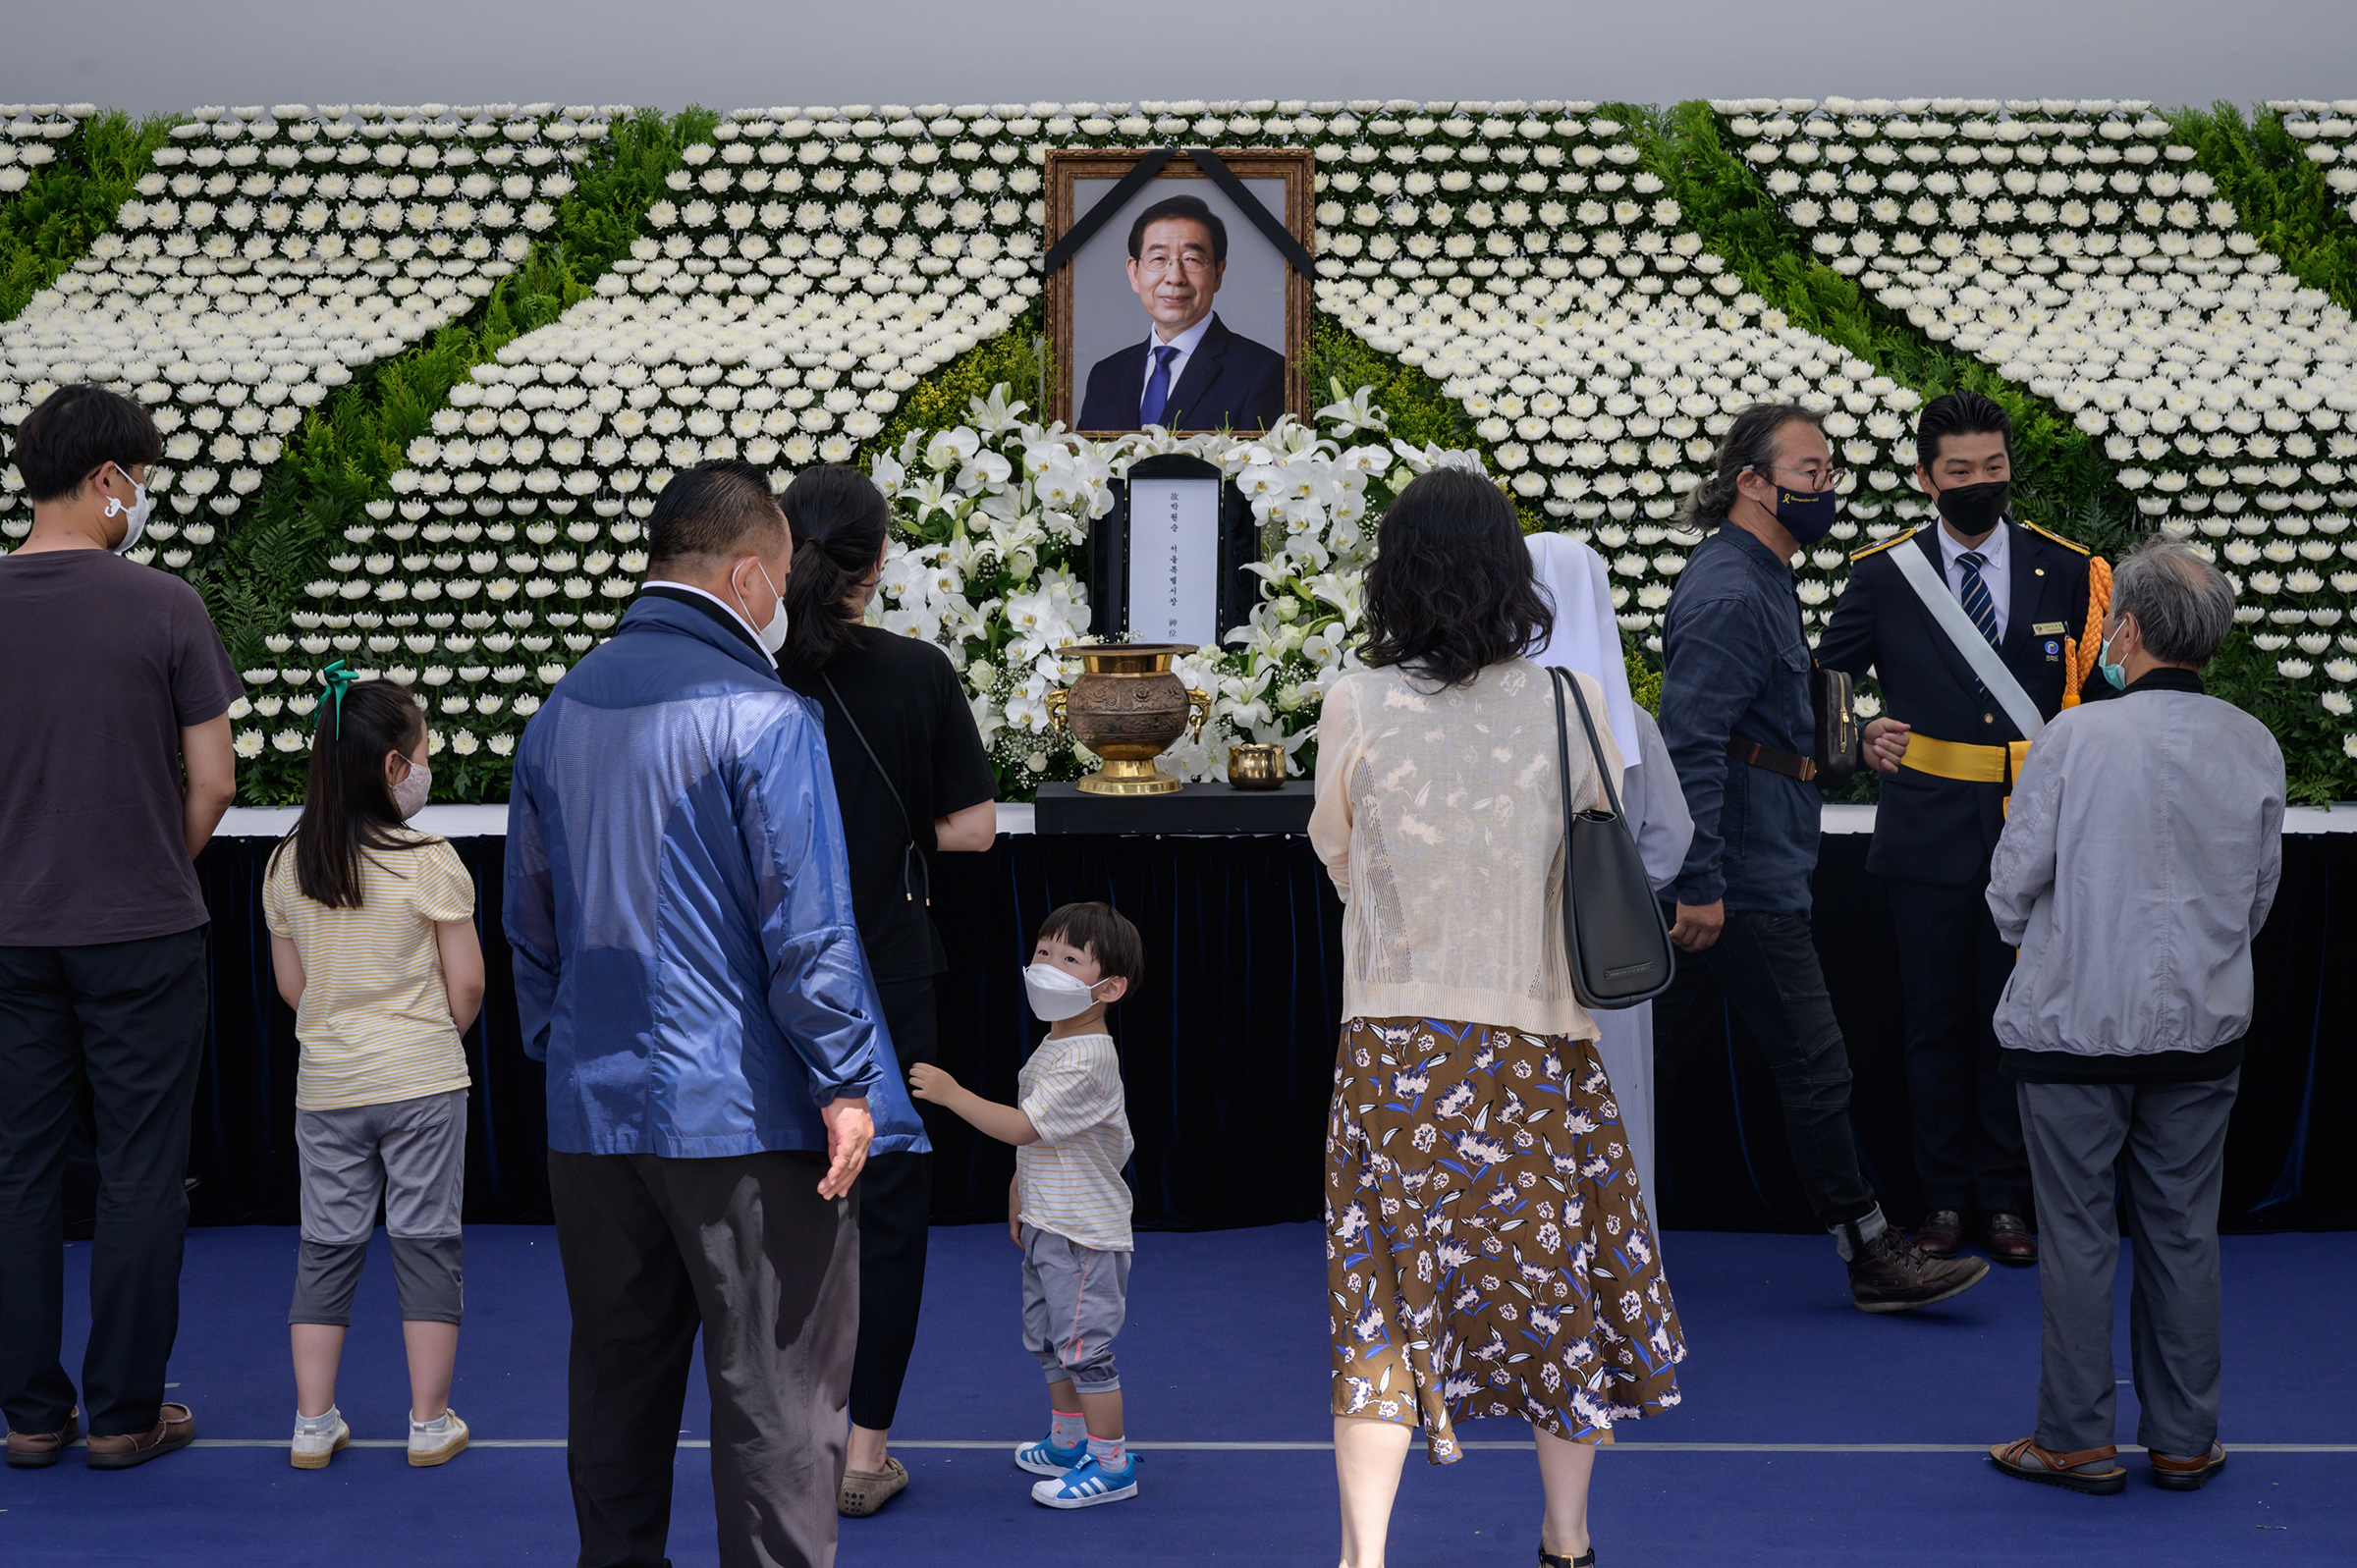 Mourners pay their respects at a public memorial for Park in Seoul on July 11